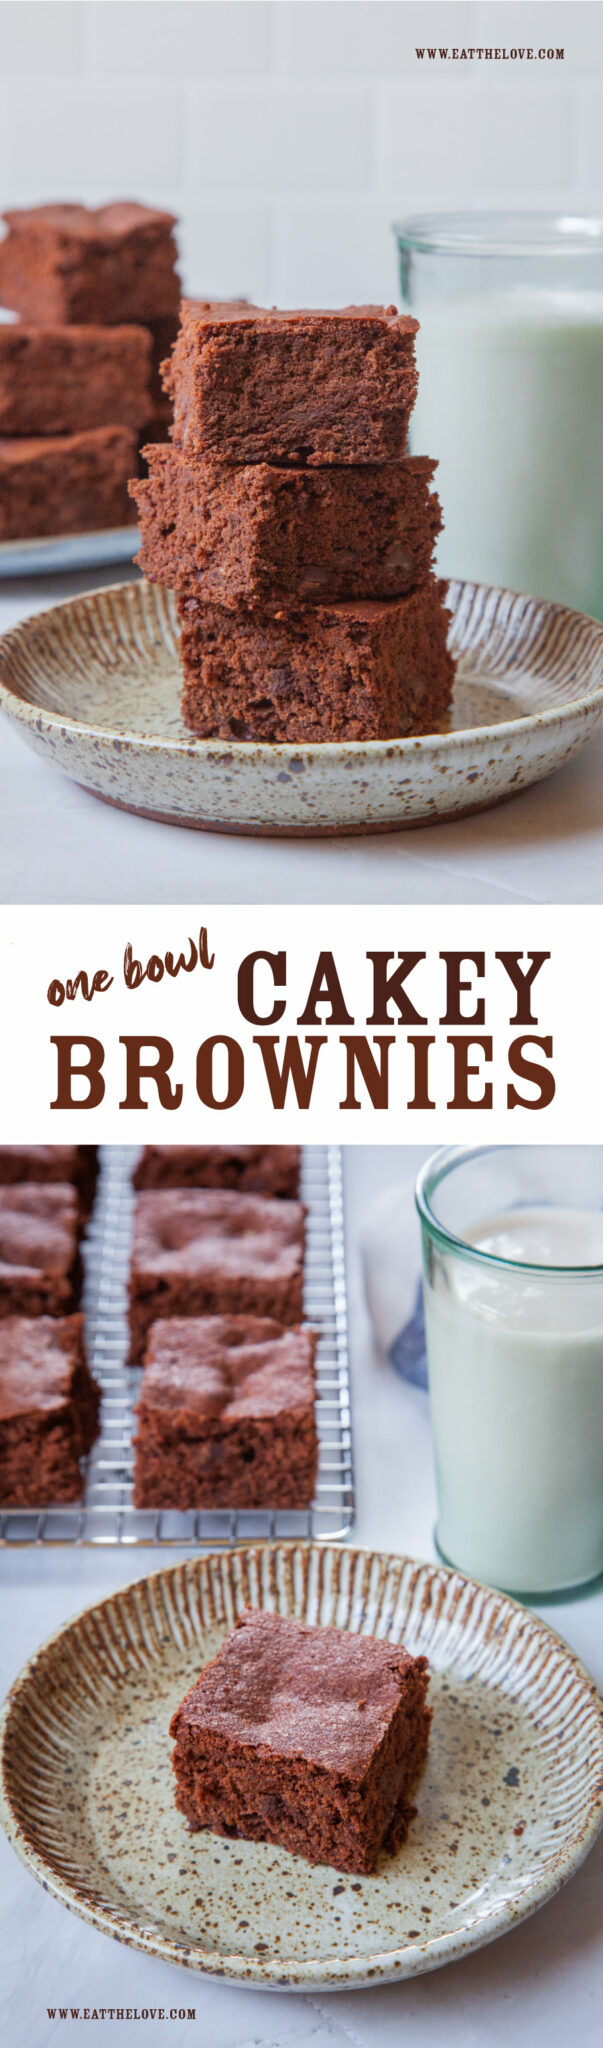 Top image is a stack of cakey brownies on a plate, with more brownies and a glass of milk behind it. Bottom image is a cakey brownie on a plate, with more brownies on a wire cooling rack and a glass of milk behind the plate.